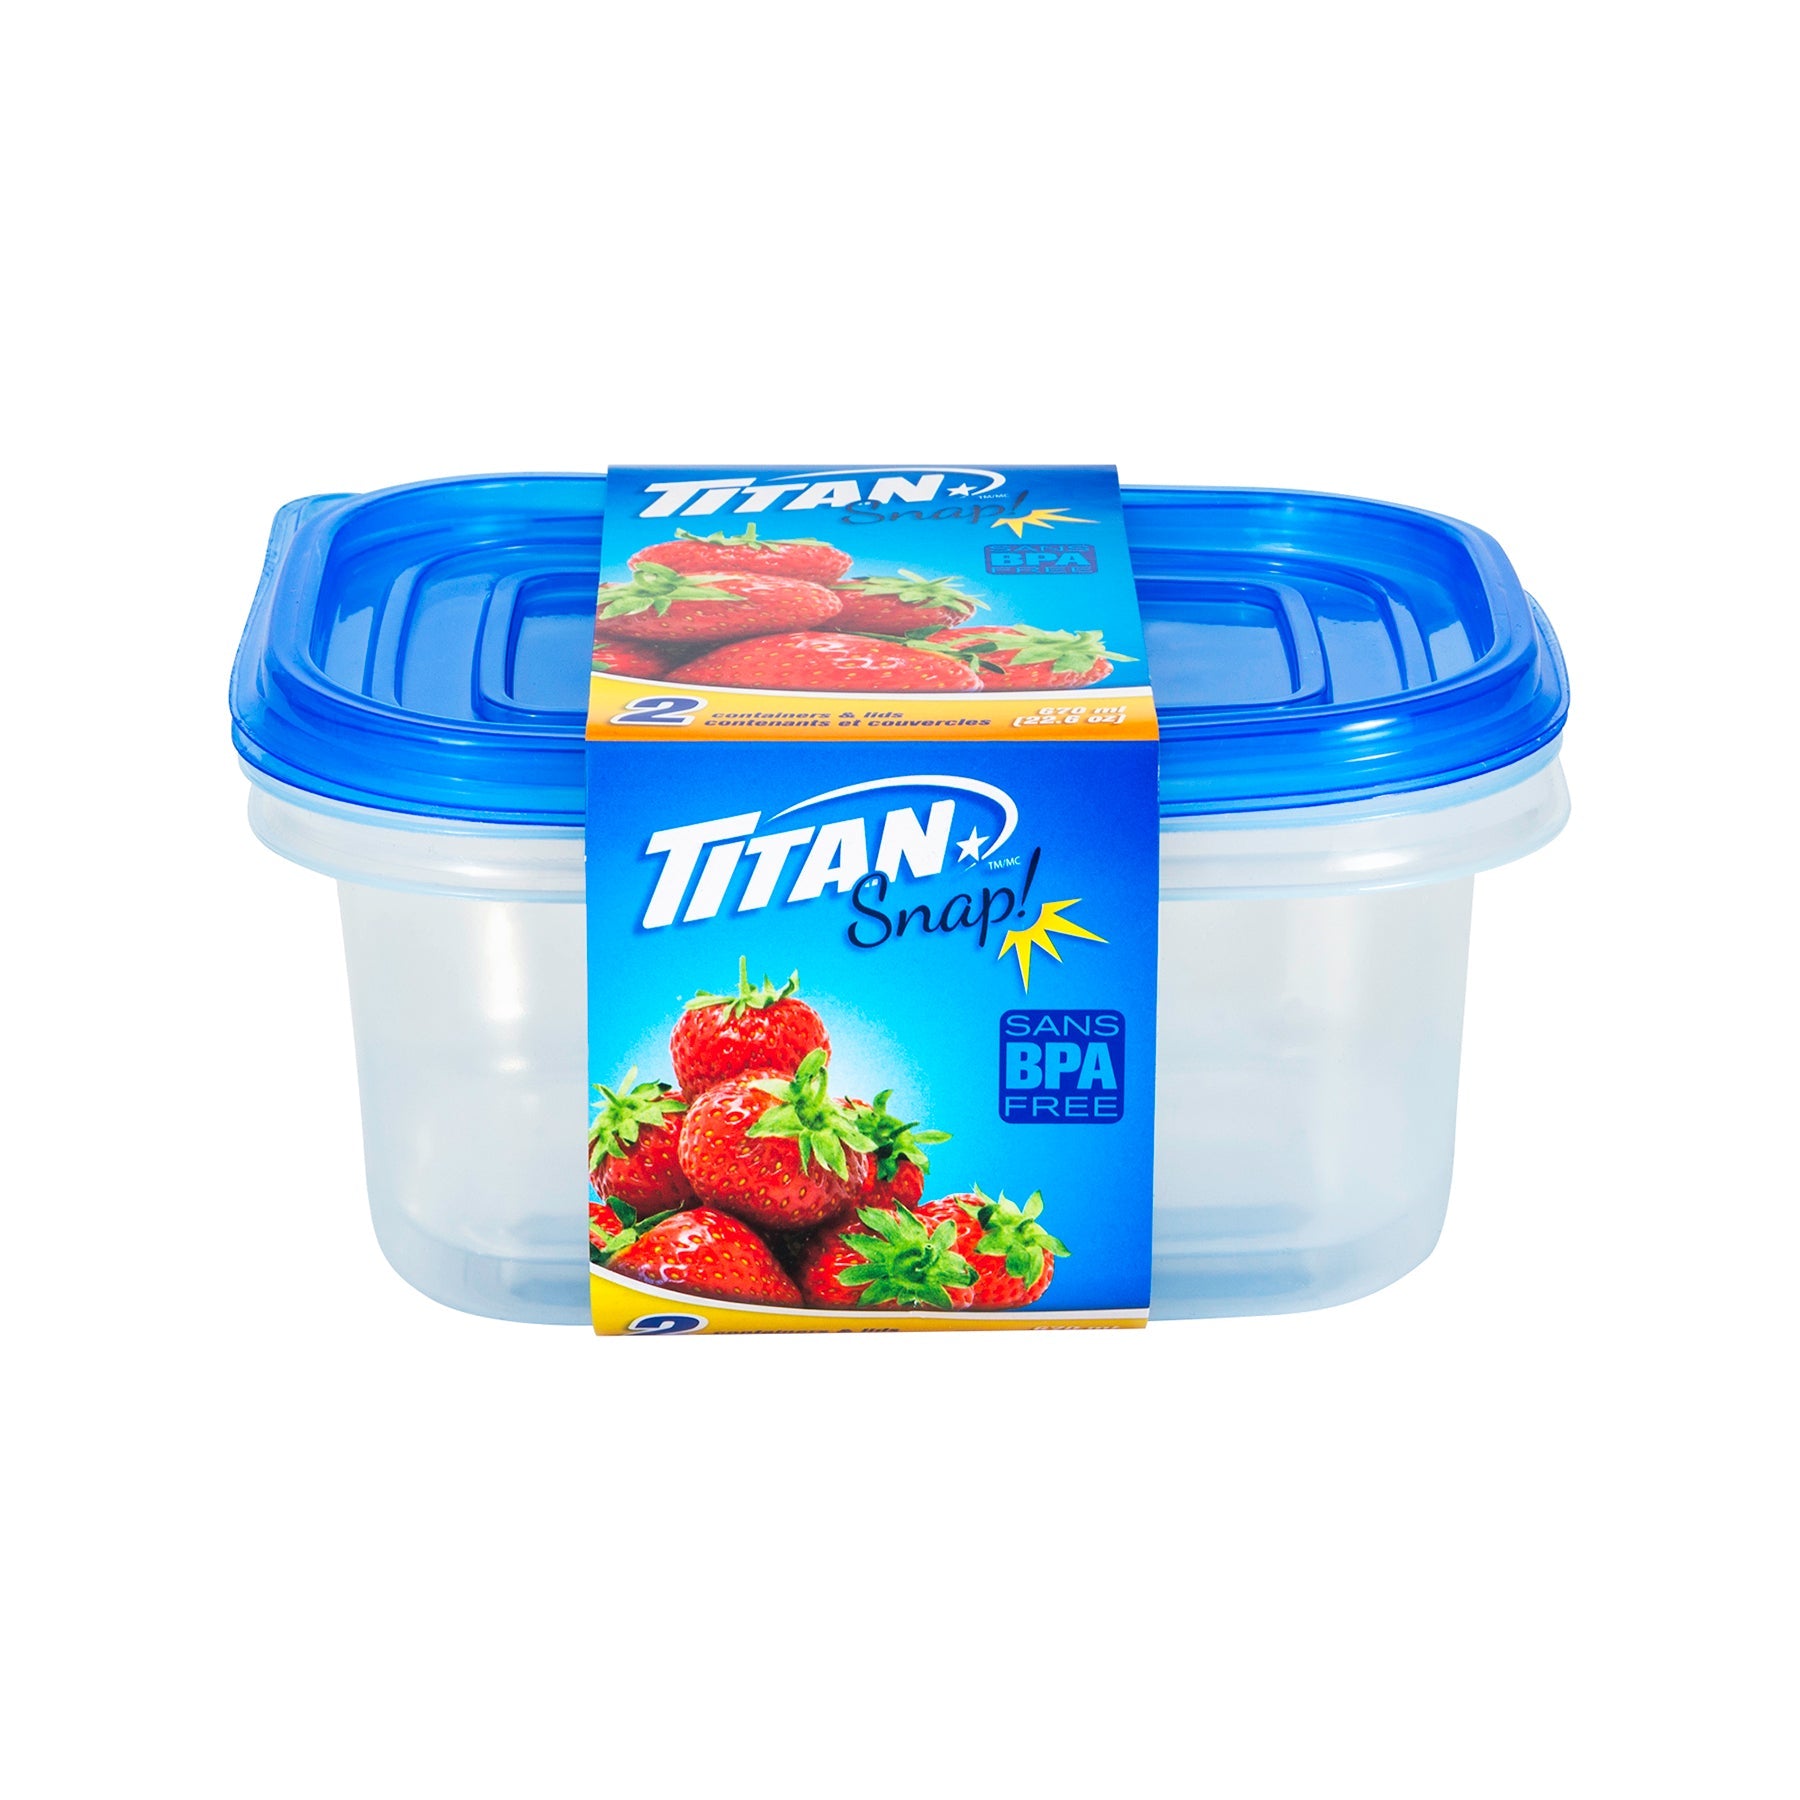 Titan Snap 2 Plastic Food Containers with Lid 22.6oz  5x3x2.7in